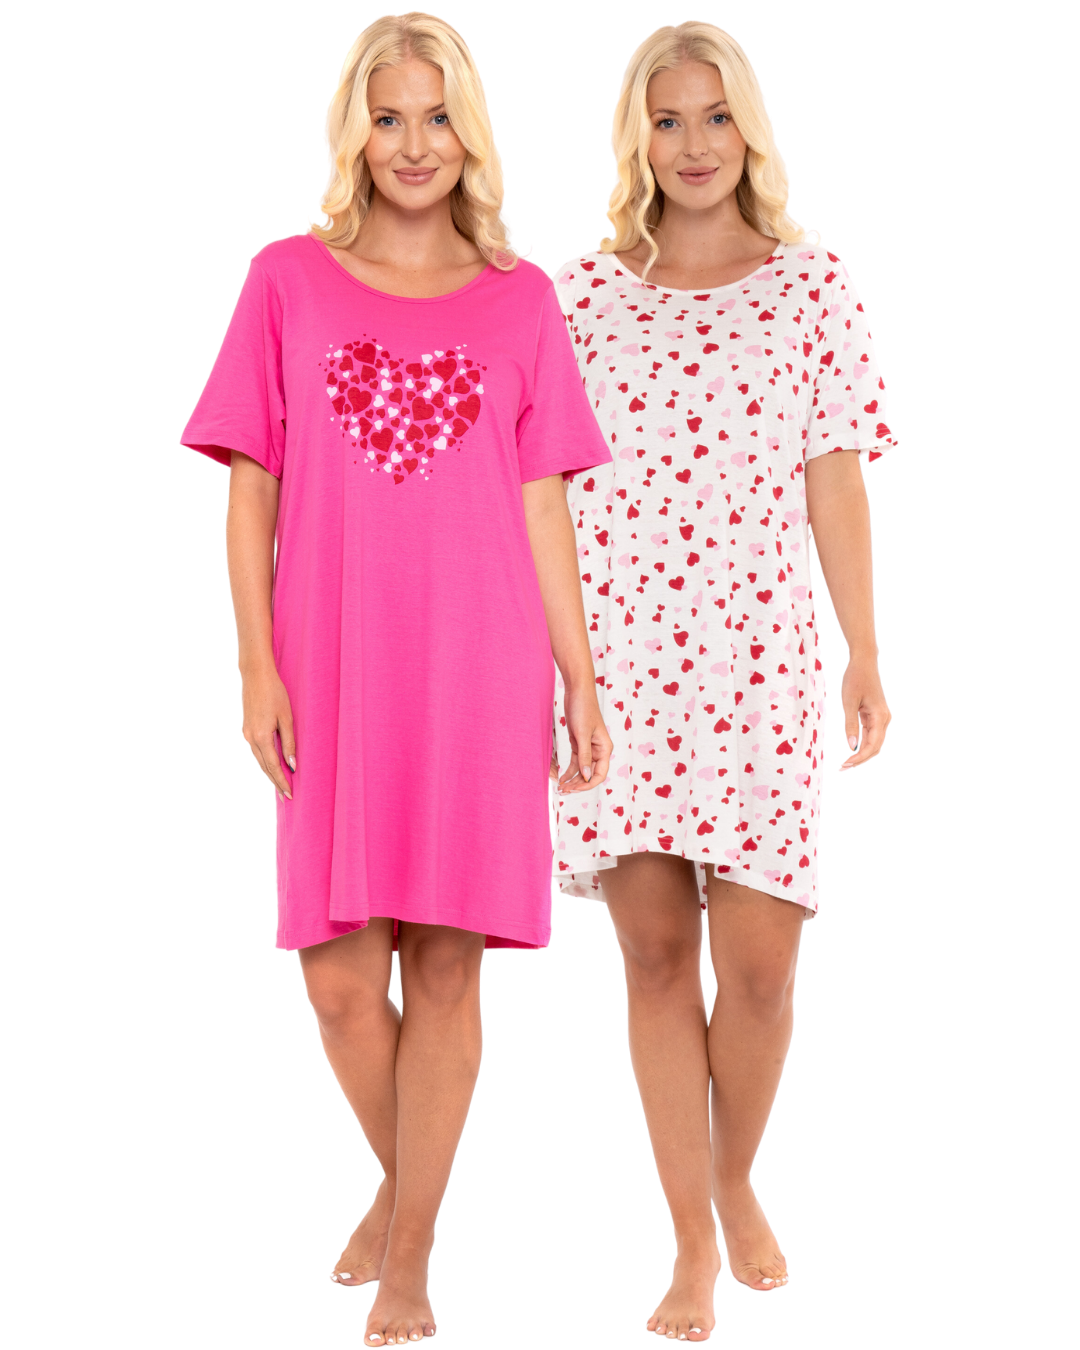 Pack of 2 Pink Heart 100% Cotton Nightshirts